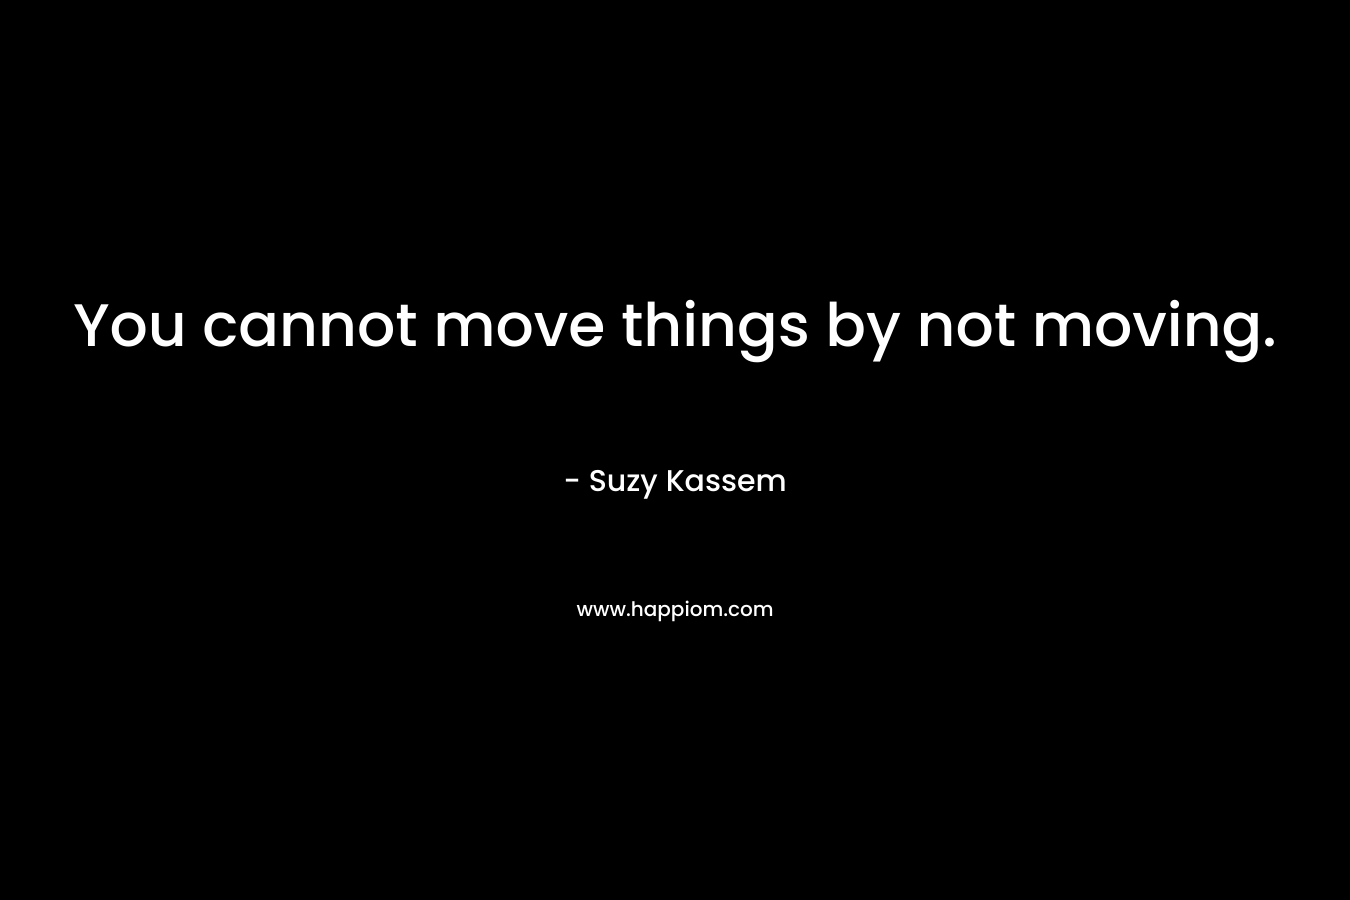 You cannot move things by not moving.